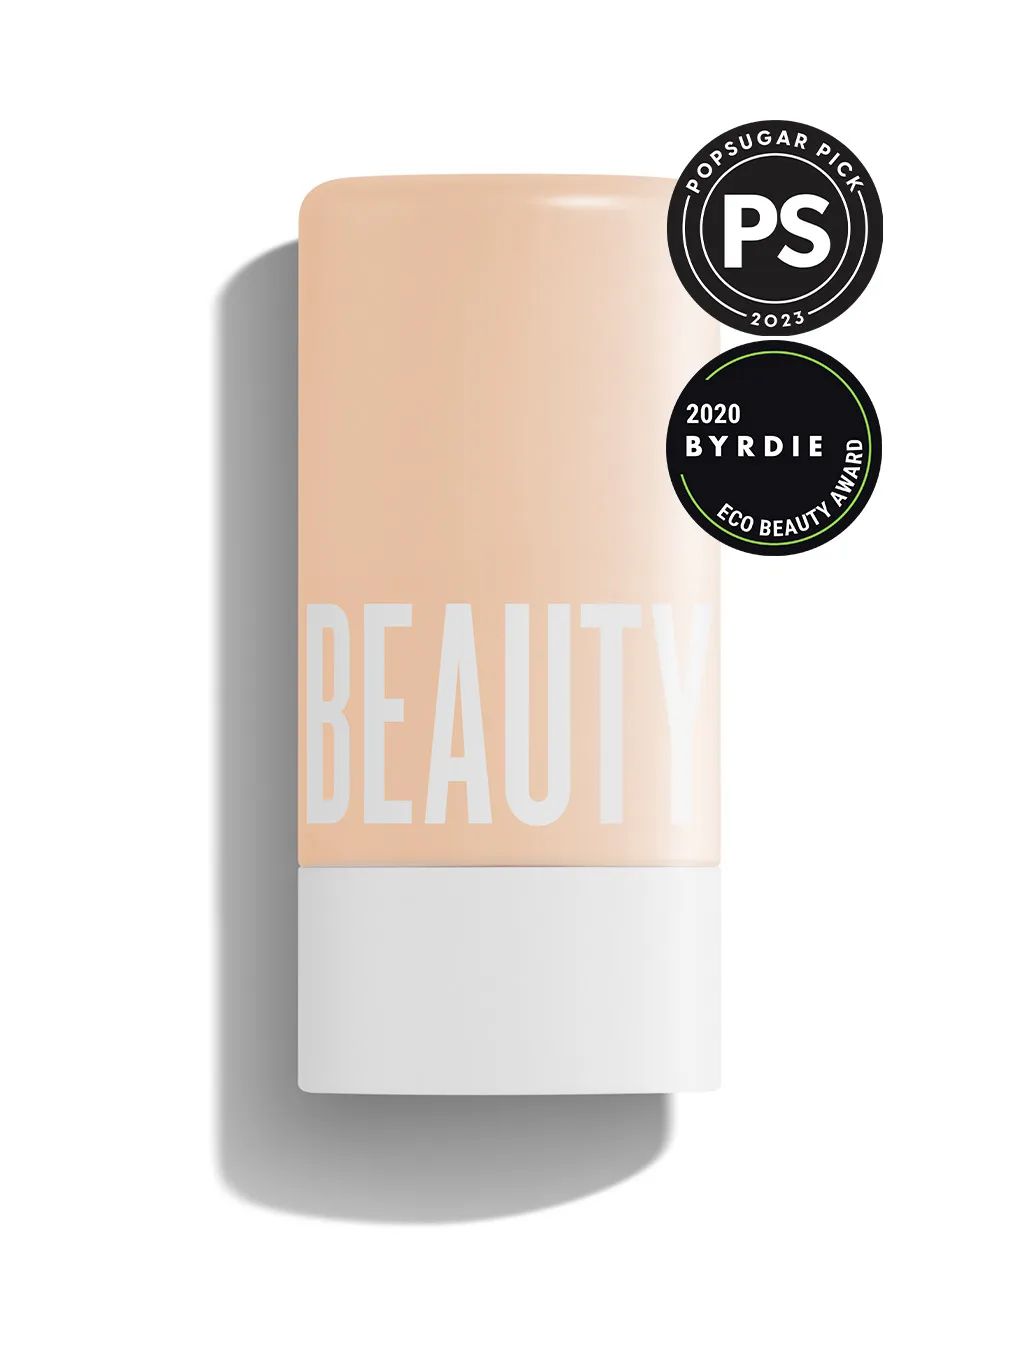 Dew Skin Tinted Moisturizer - Beautycounter - Skin Care, Makeup, Bath and Body and more! | Beautycounter.com